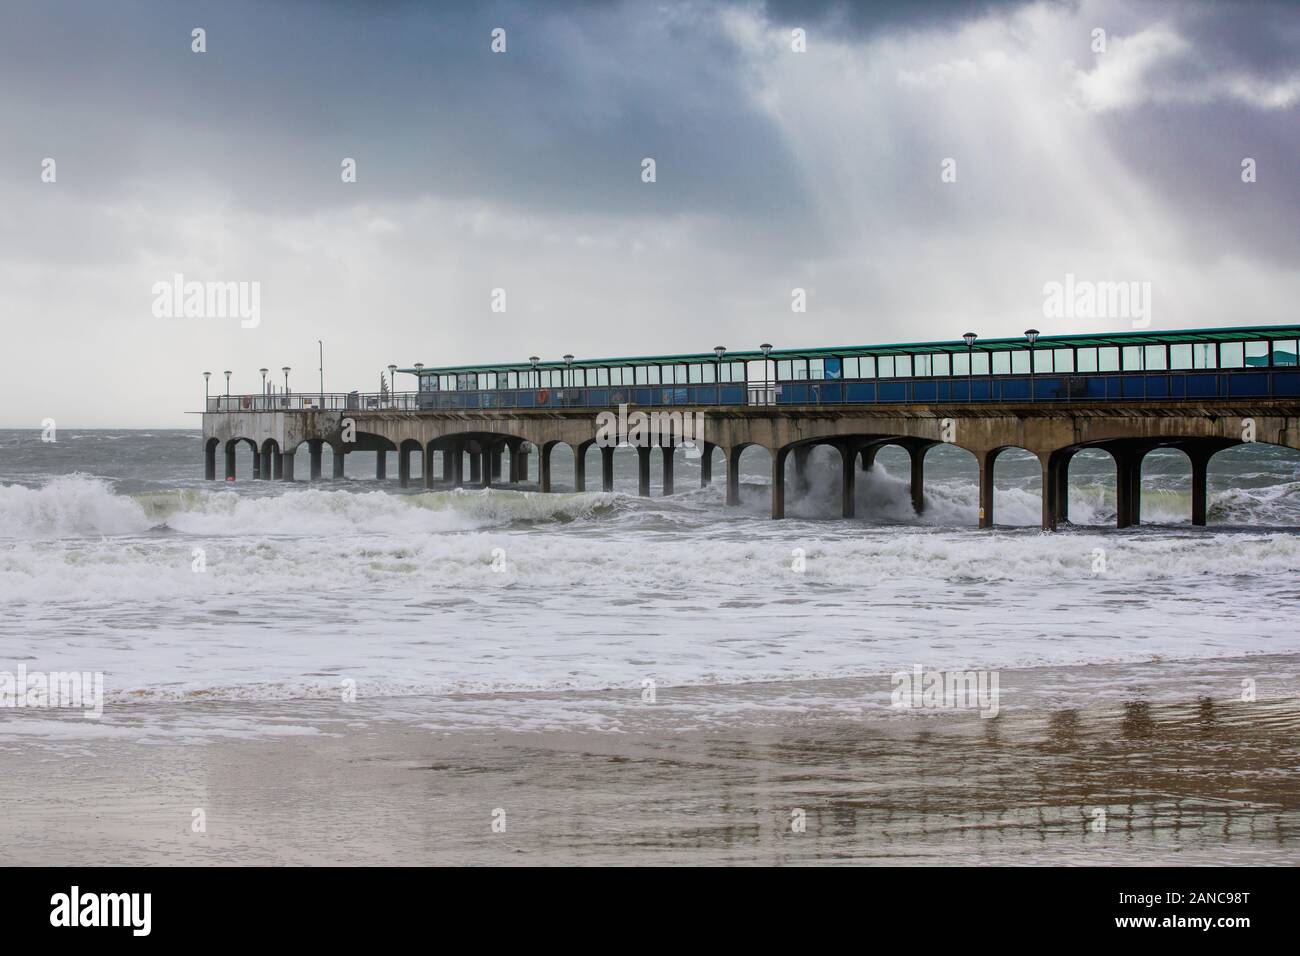 Boscombe Pier sous rayons. Banque D'Images